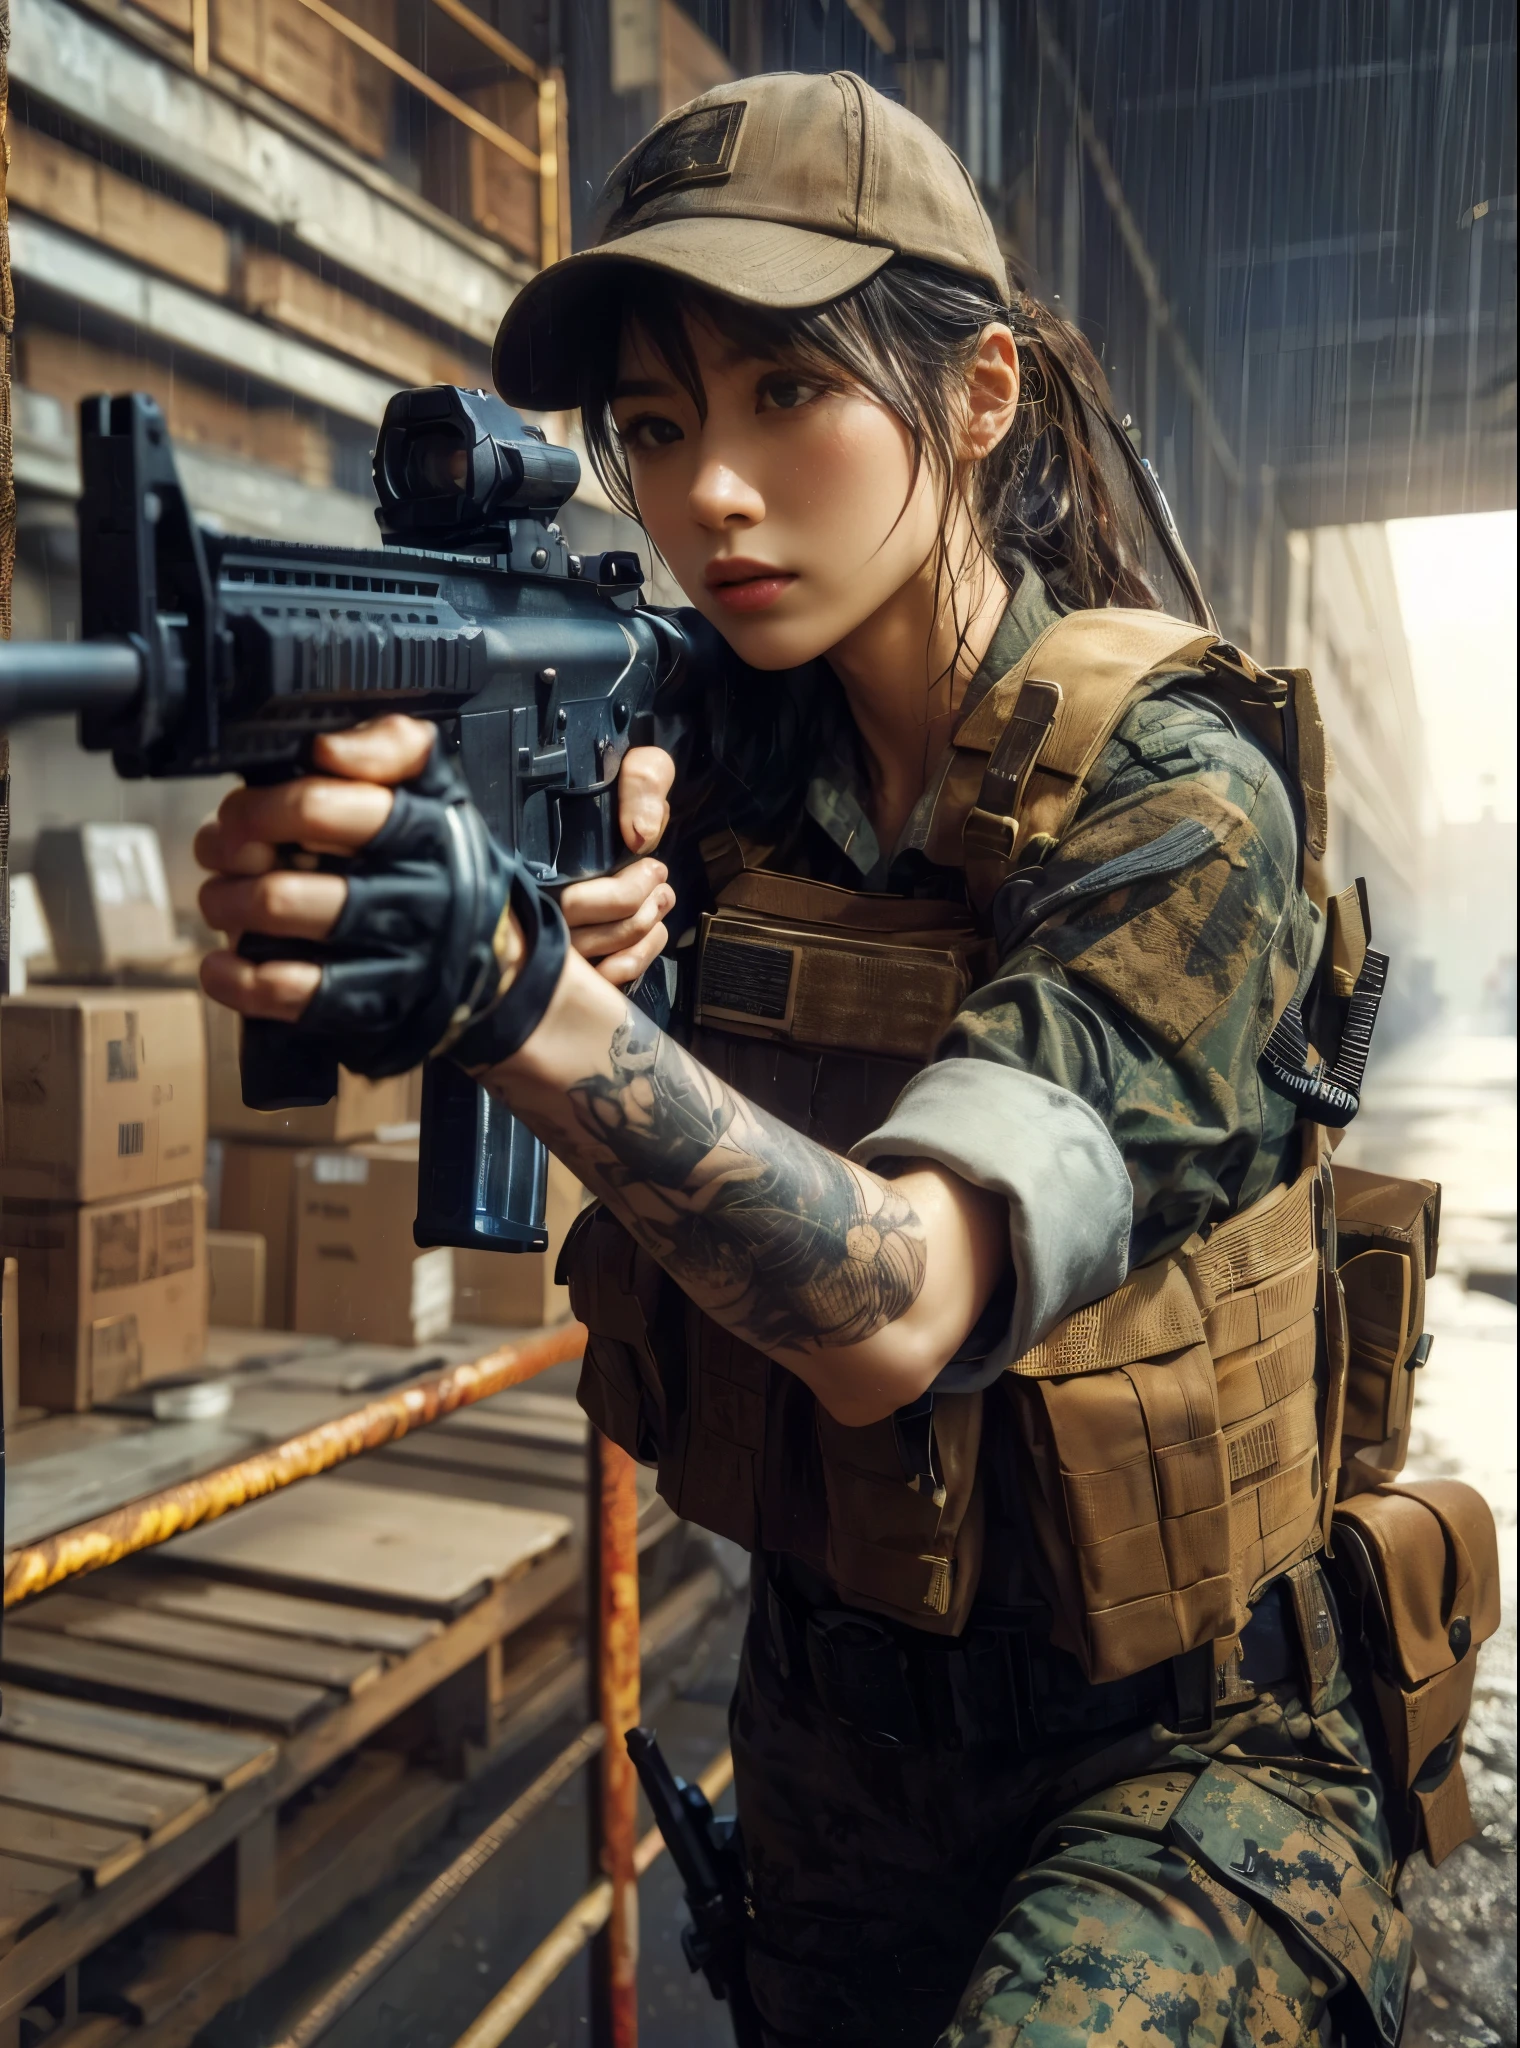 (best quality,8k,photorealistic:1.37),realistic skin texture, beautiful Japanese female marine, aiming with an assault rifle, old warehouse district by the harbor, green t-shirt, cap, braided hair, military pants, boots, dynamic pose, running along the warehouse wall, gunfight, daring assault, tattoos, getting wet in the rain, thunderstorm, toned body, muscles, anger, bold composition